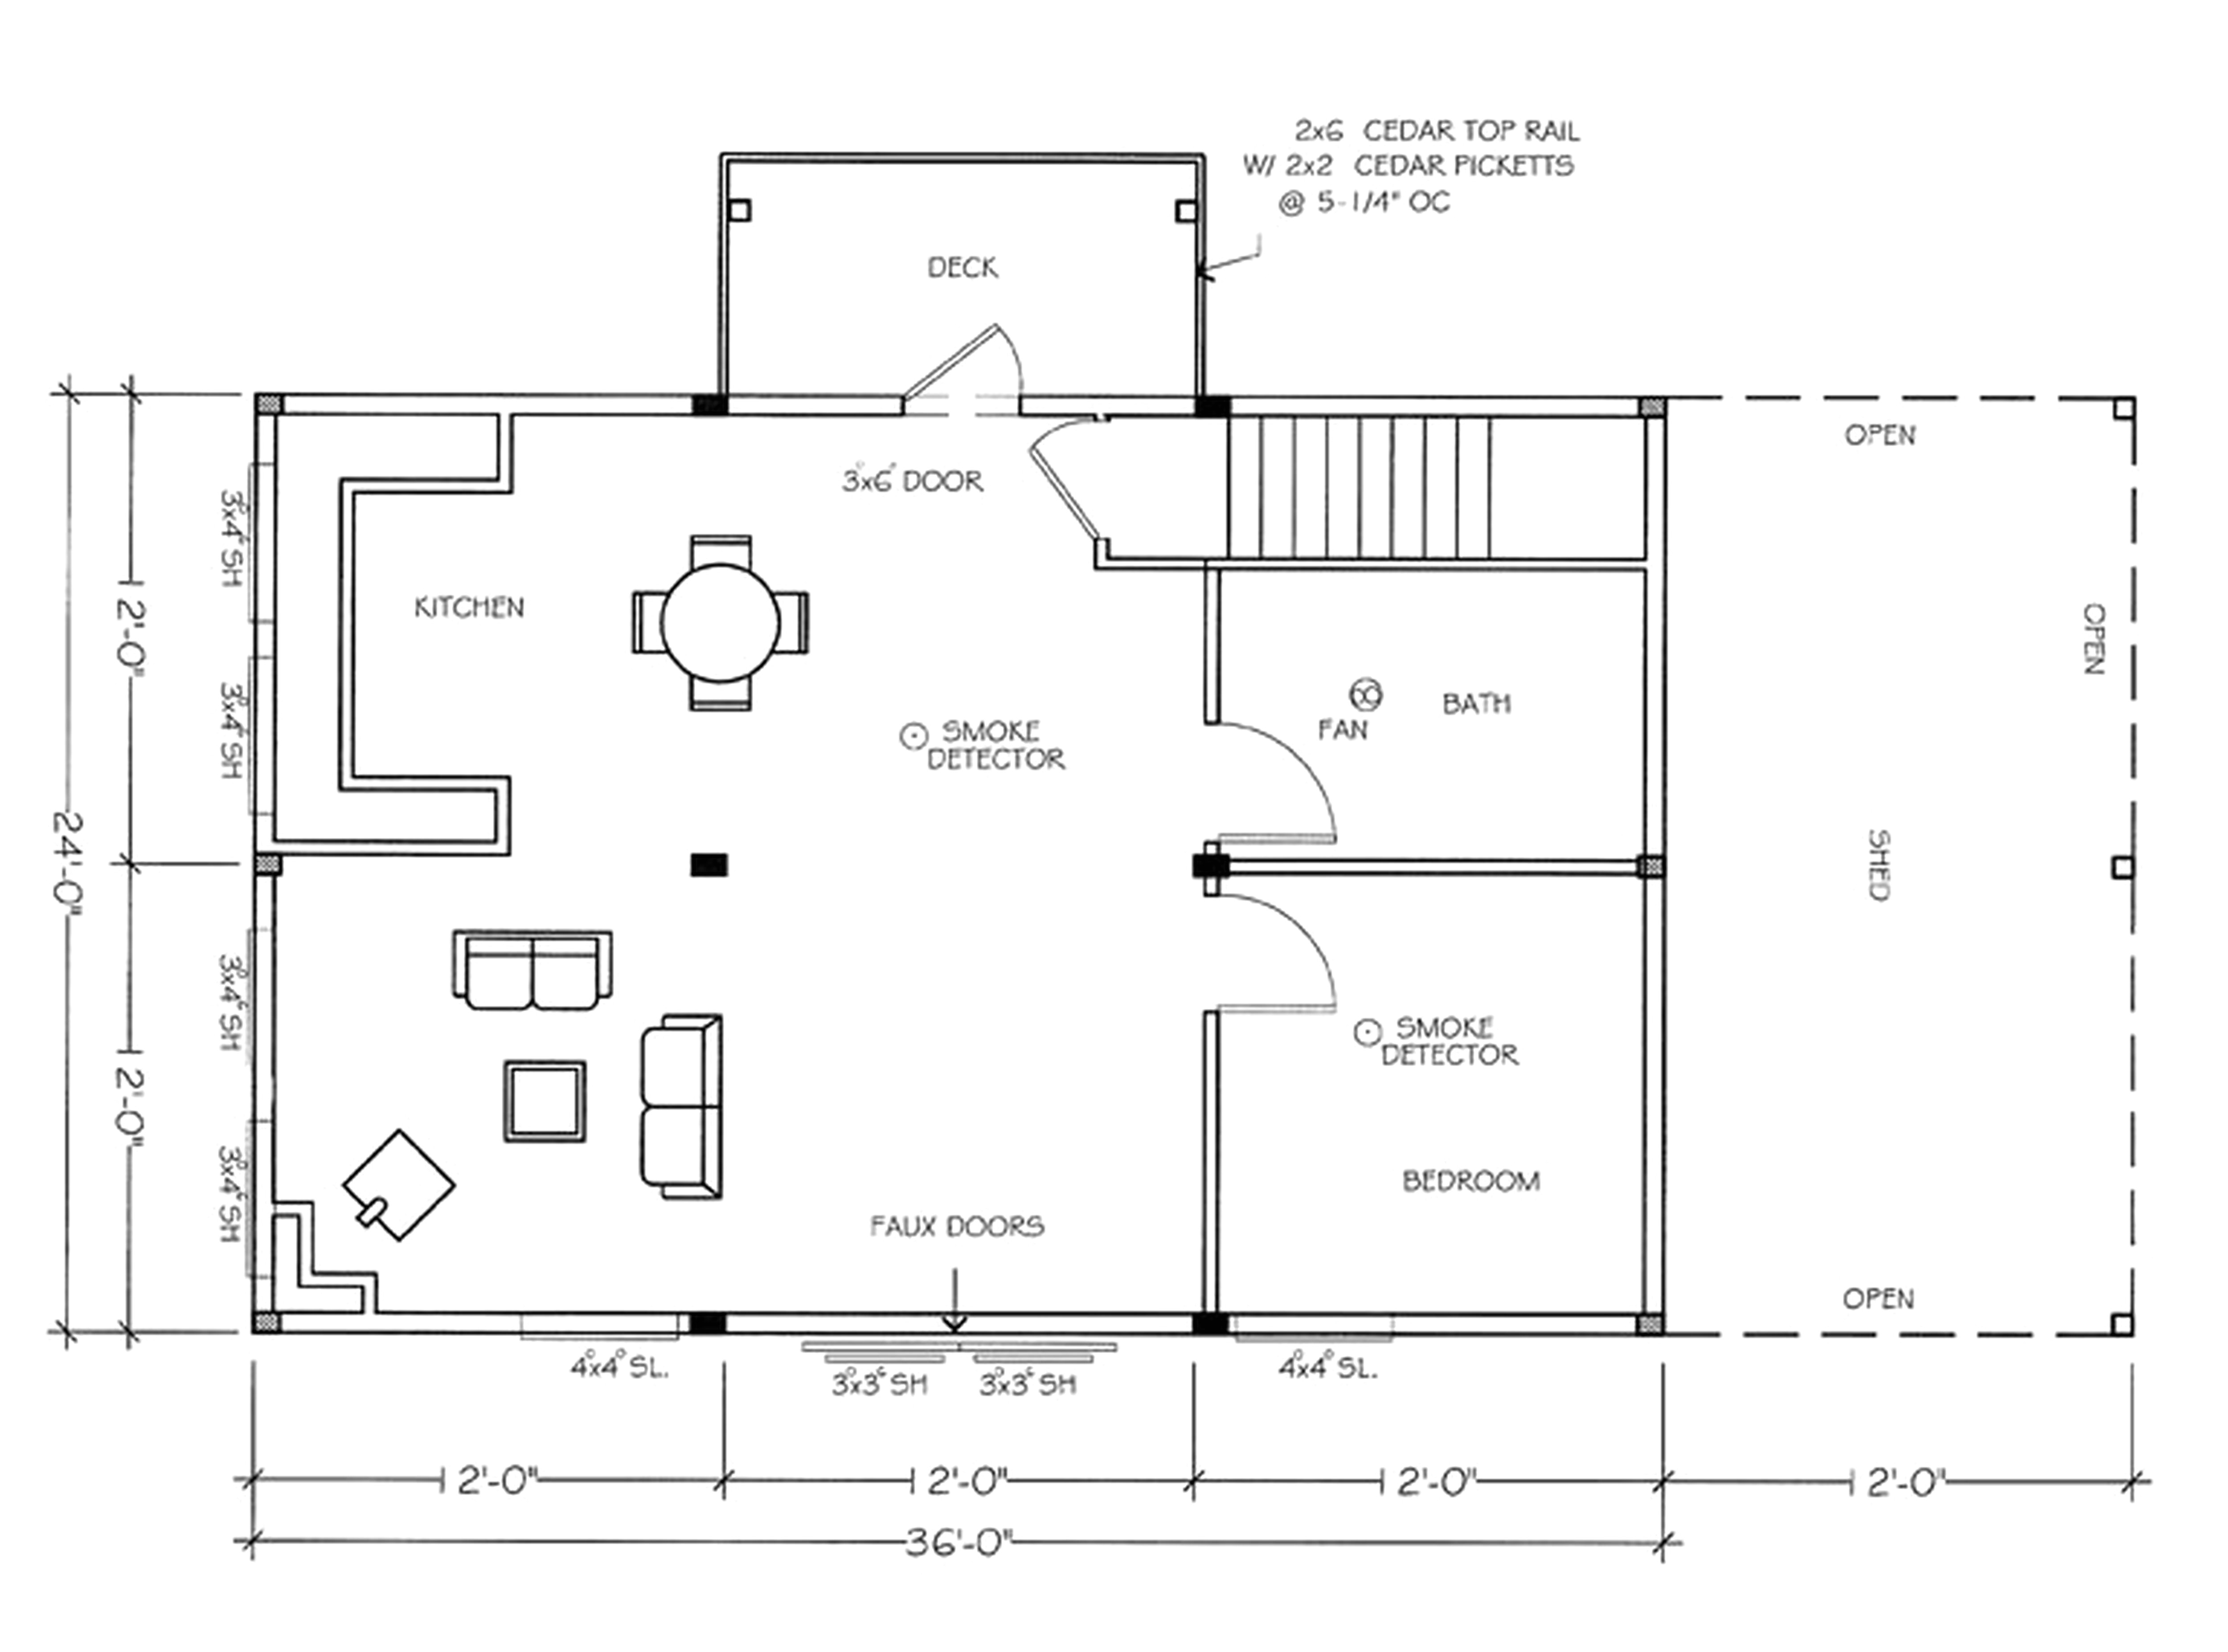 i need to draw a floor plan of my house